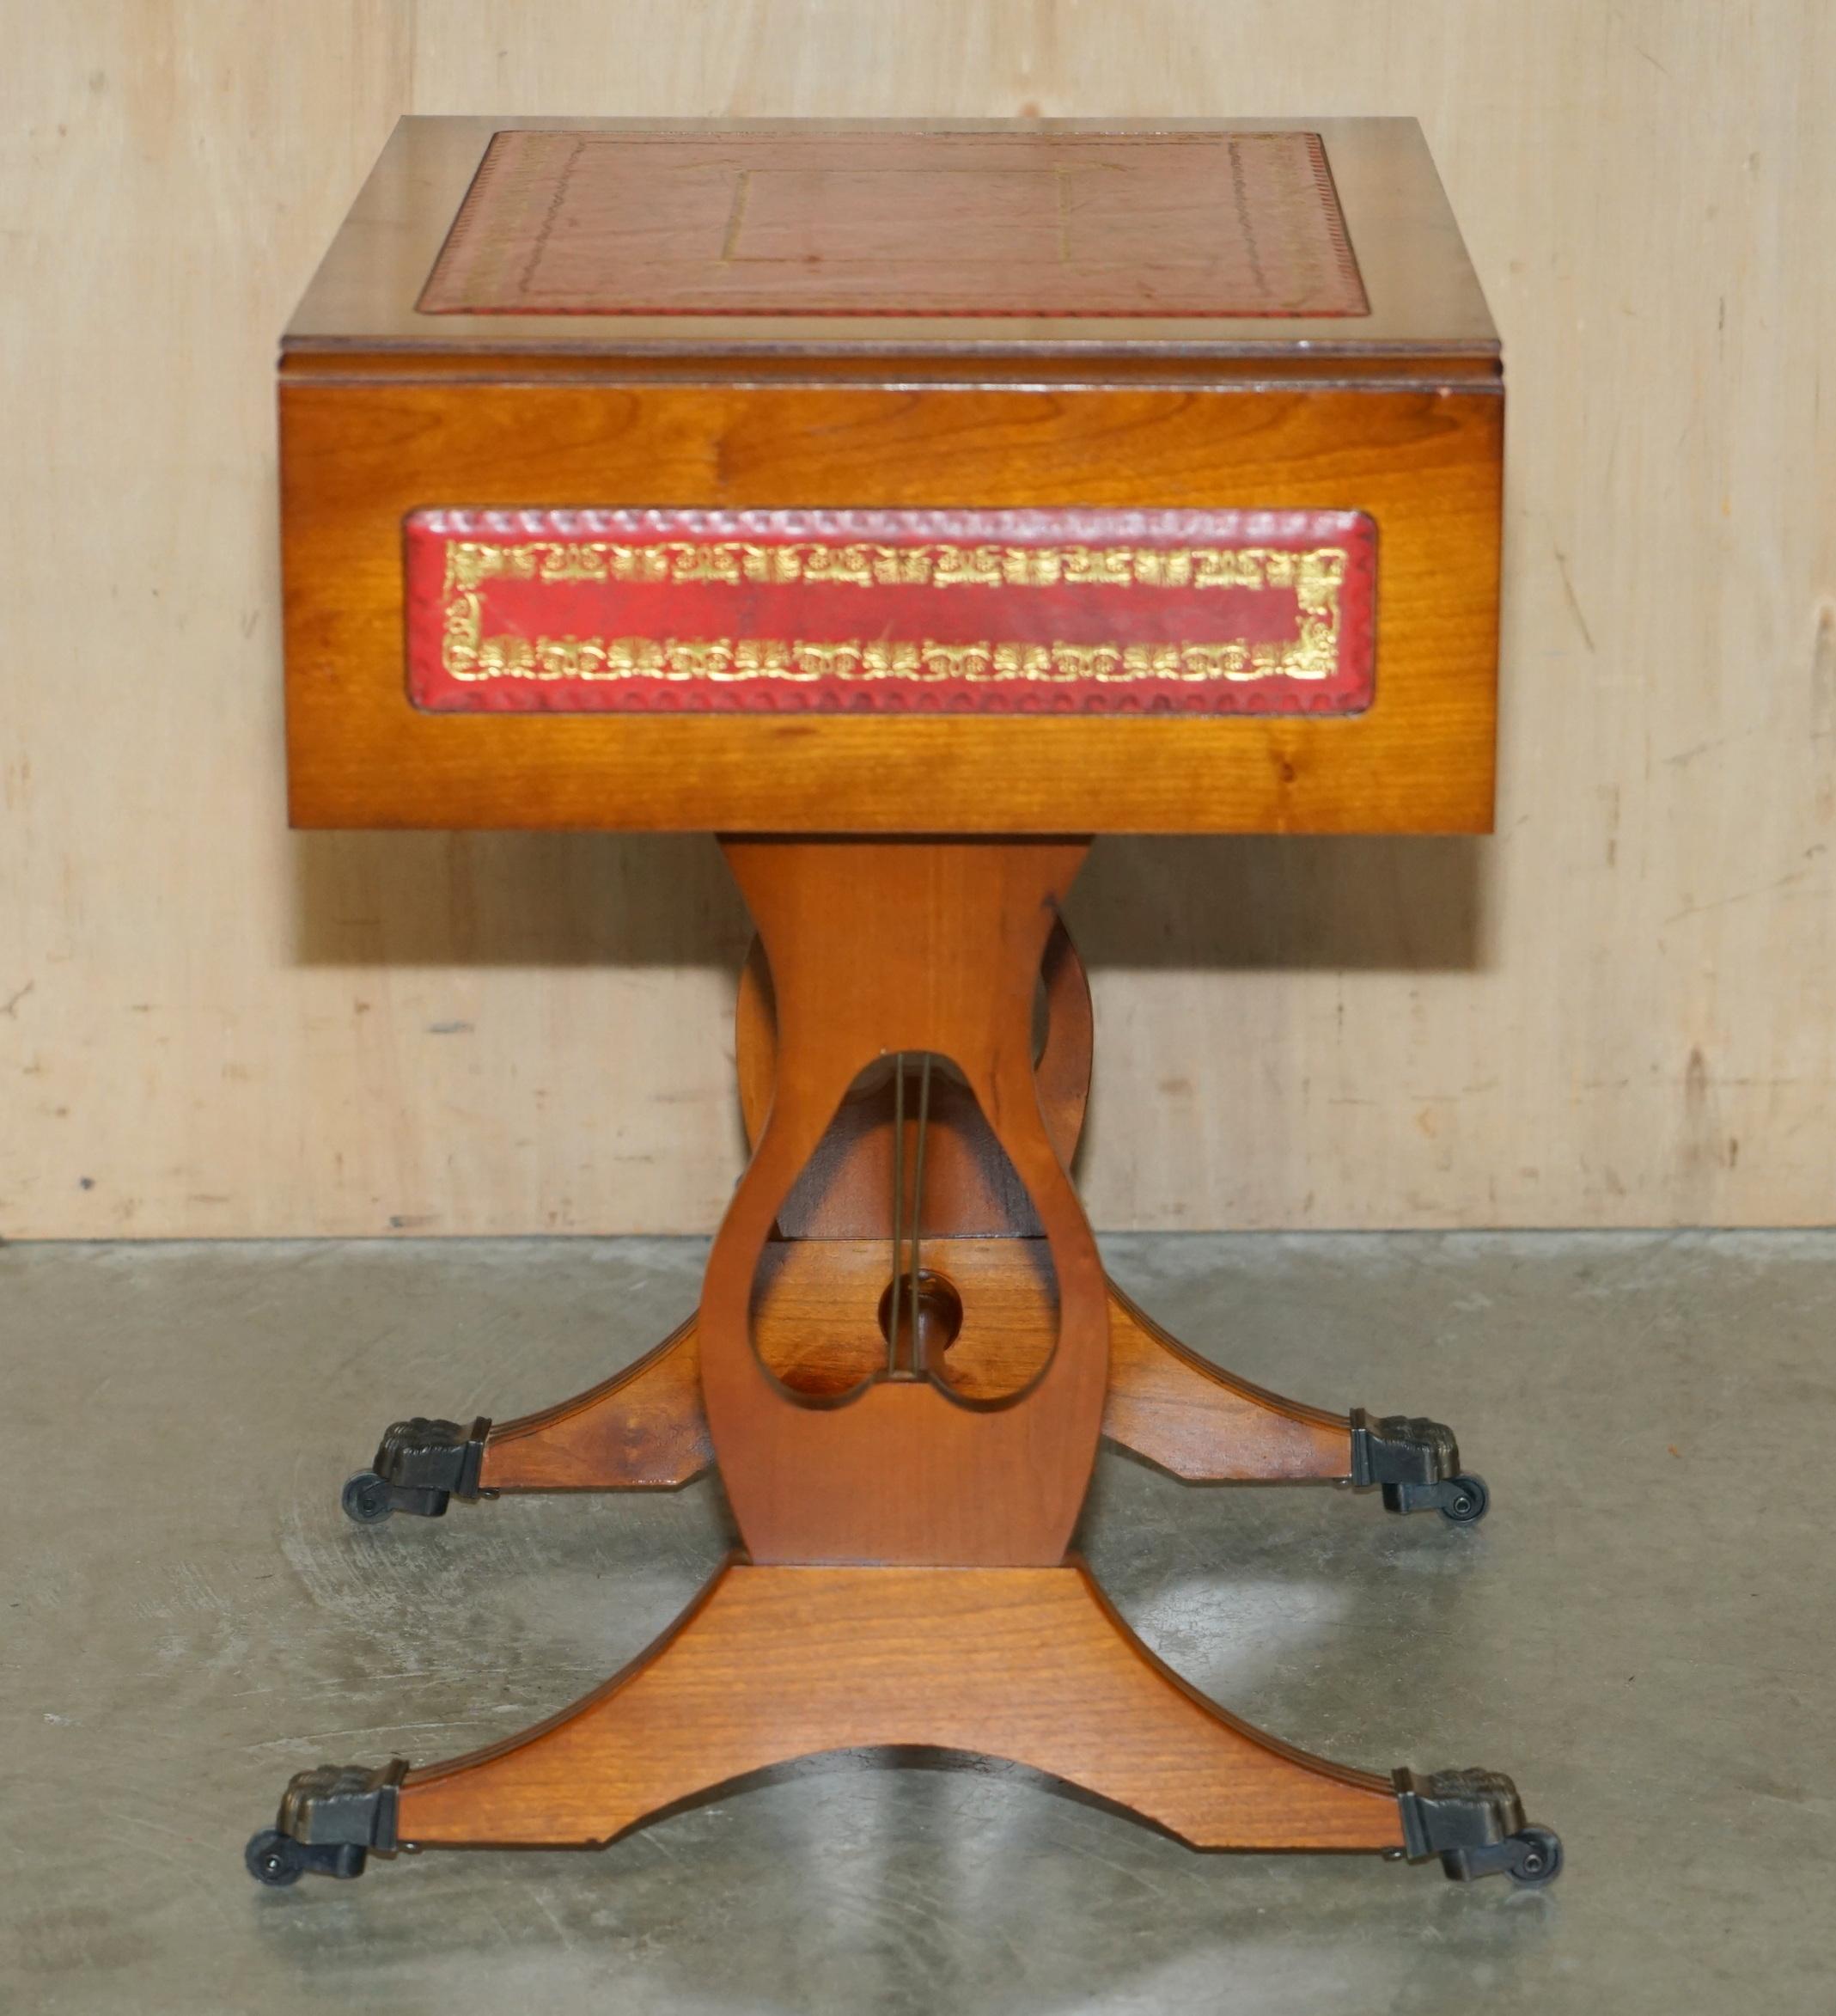 LOVELY ViNTAGE OXBLOOD LEATHER EXTENDING SIDE TABLE WITH GOLD LEAF INLAY For Sale 4